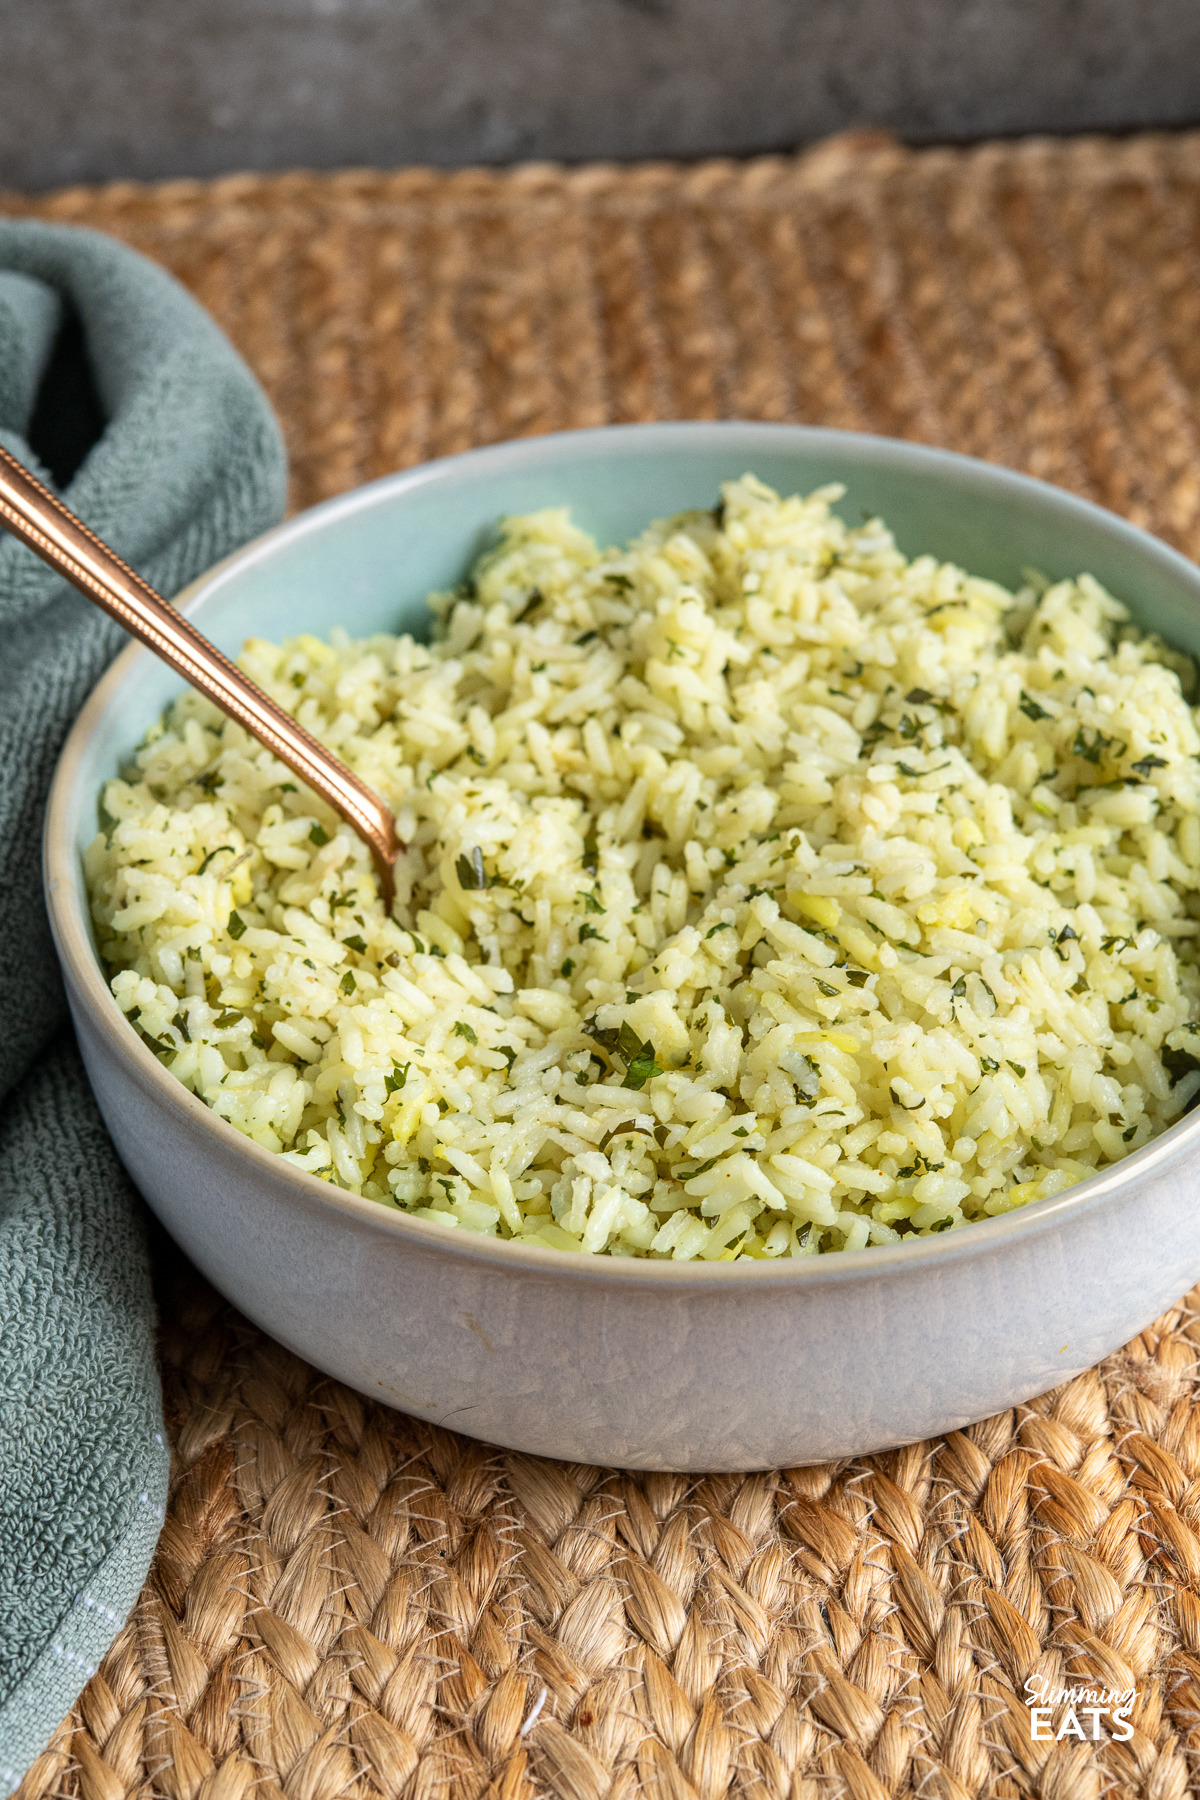 Cooked herby garlic rice in light turquoise bowl with spoon placed on a mat.